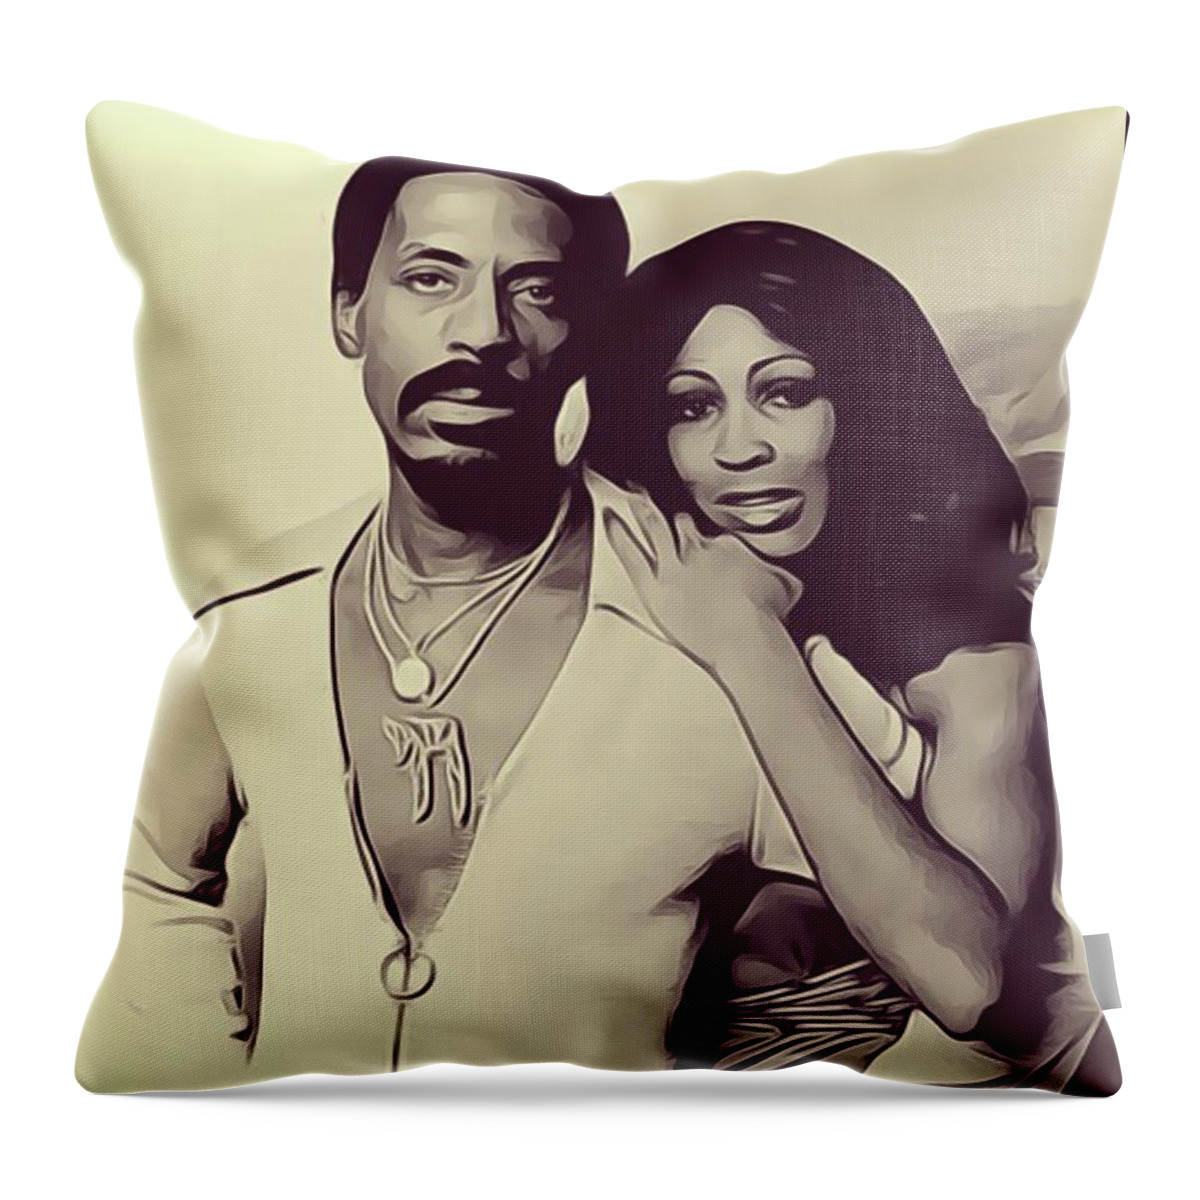 Ike Throw Pillow featuring the digital art Ike and Tina Turner by Esoterica Art Agency